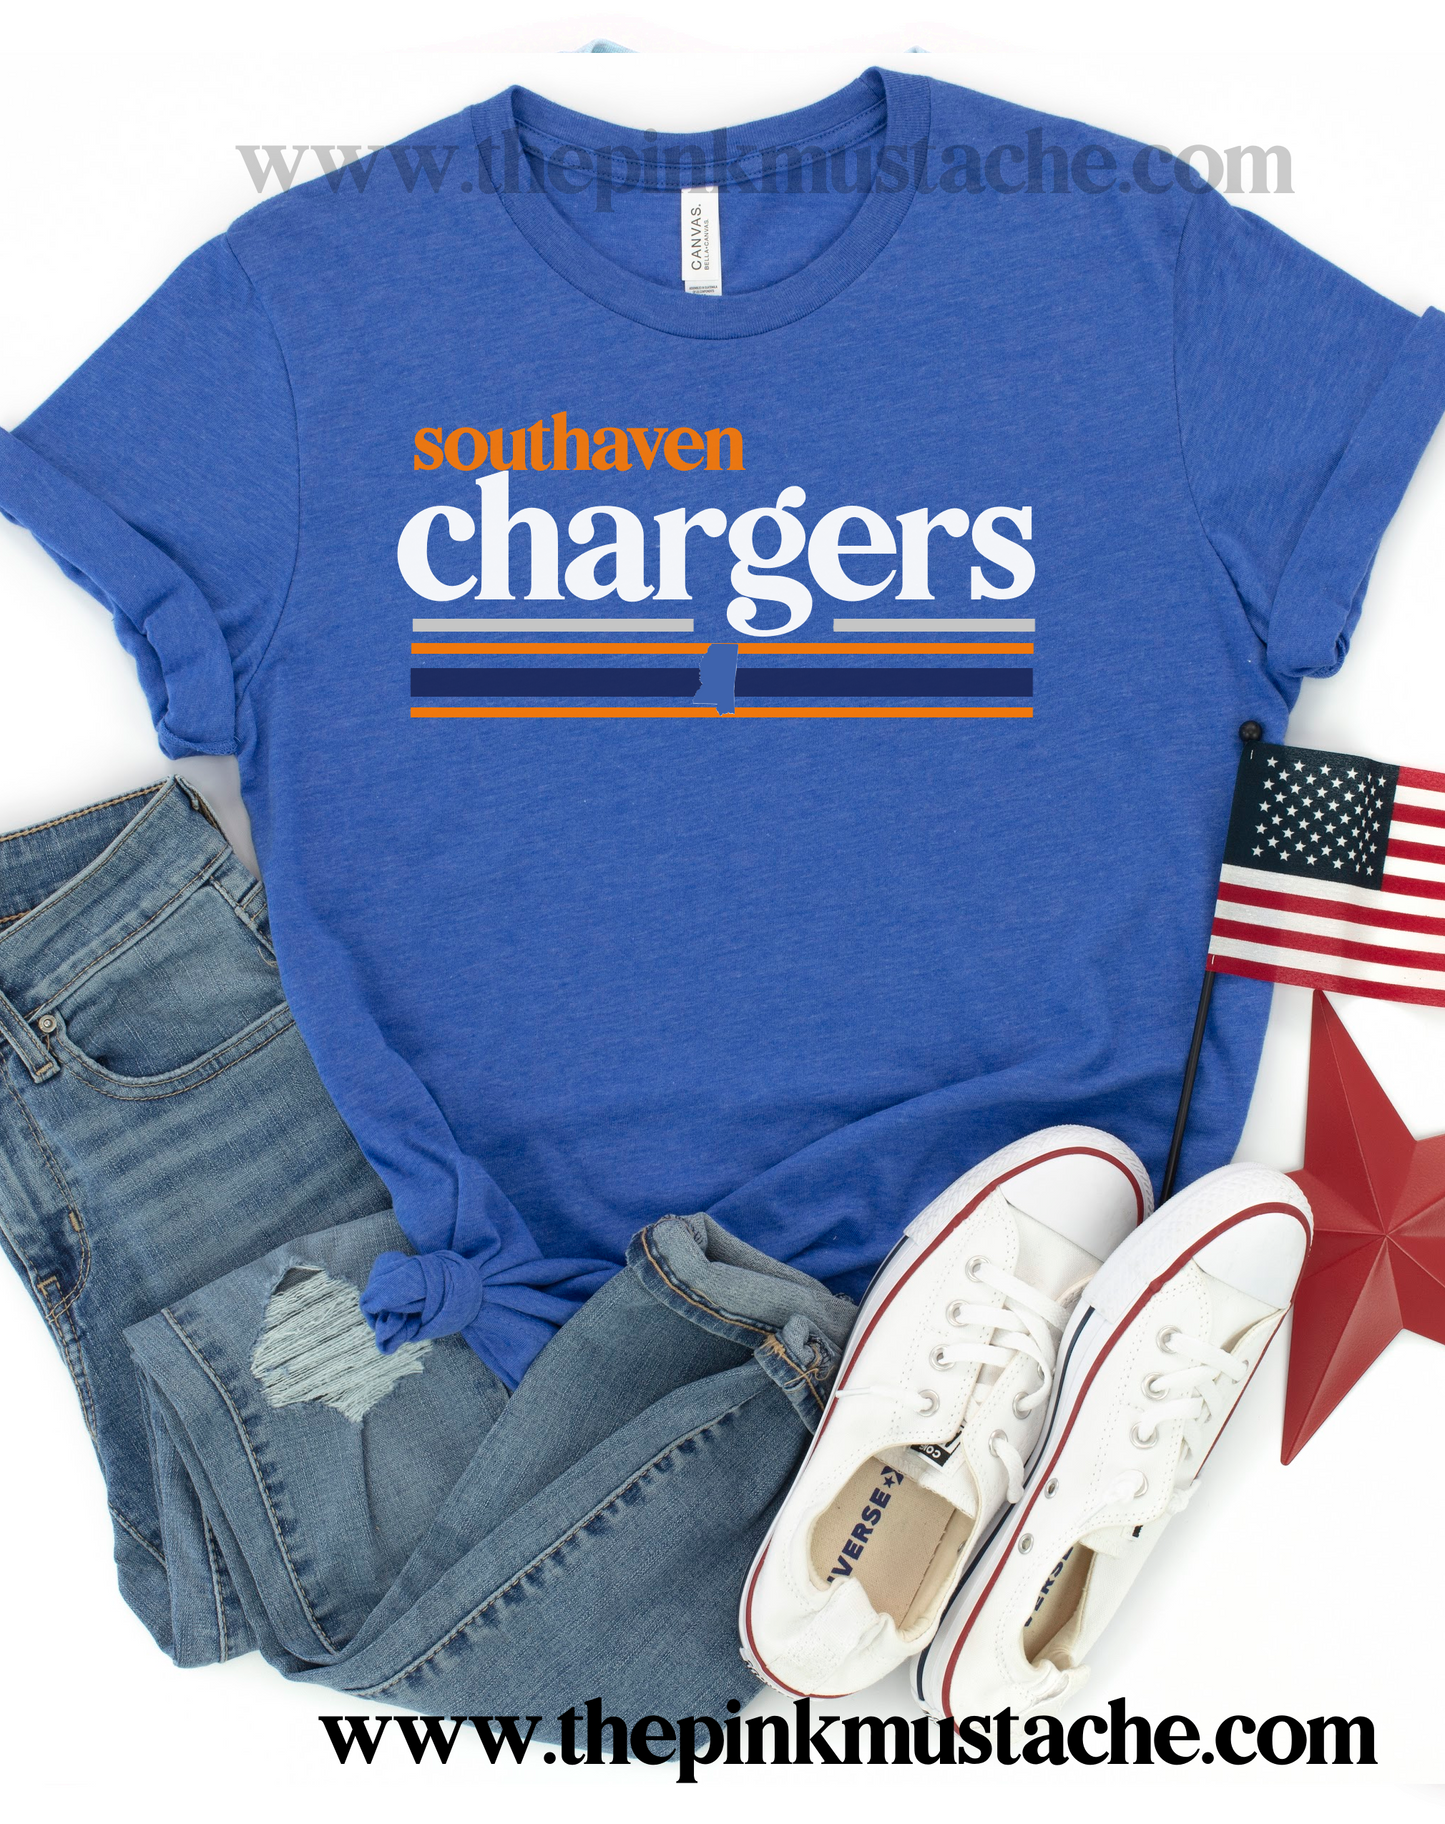 Southaven Chargers Shirt / DC -Desoto County Schools / Mississippi School Shirt